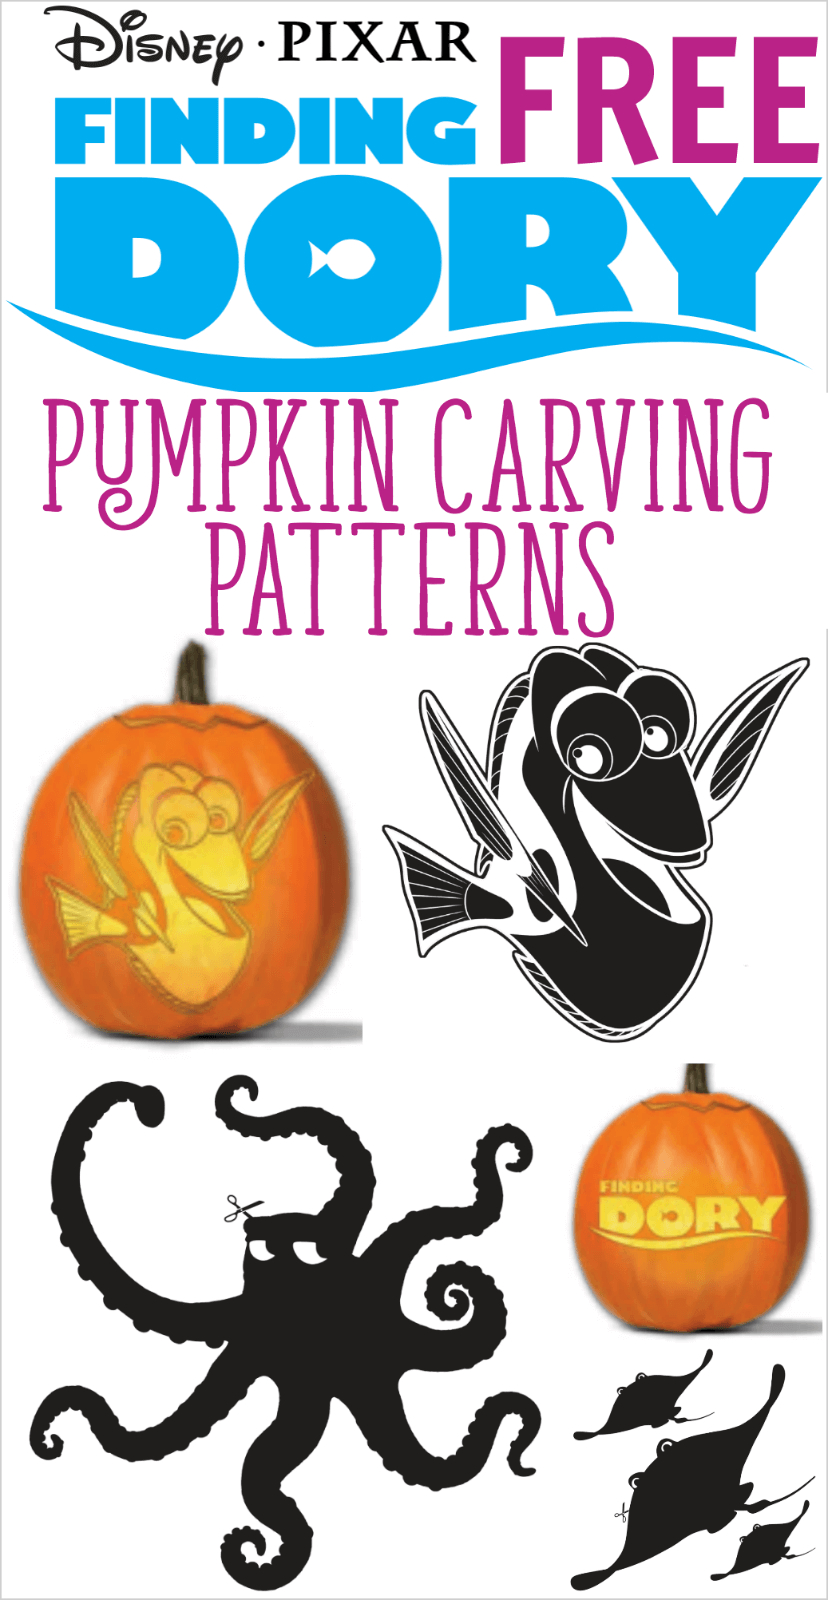 Free Finding Dory Pumpkin Carving Patterns To Print! | All Things - Free Printable Toy Story Pumpkin Carving Patterns